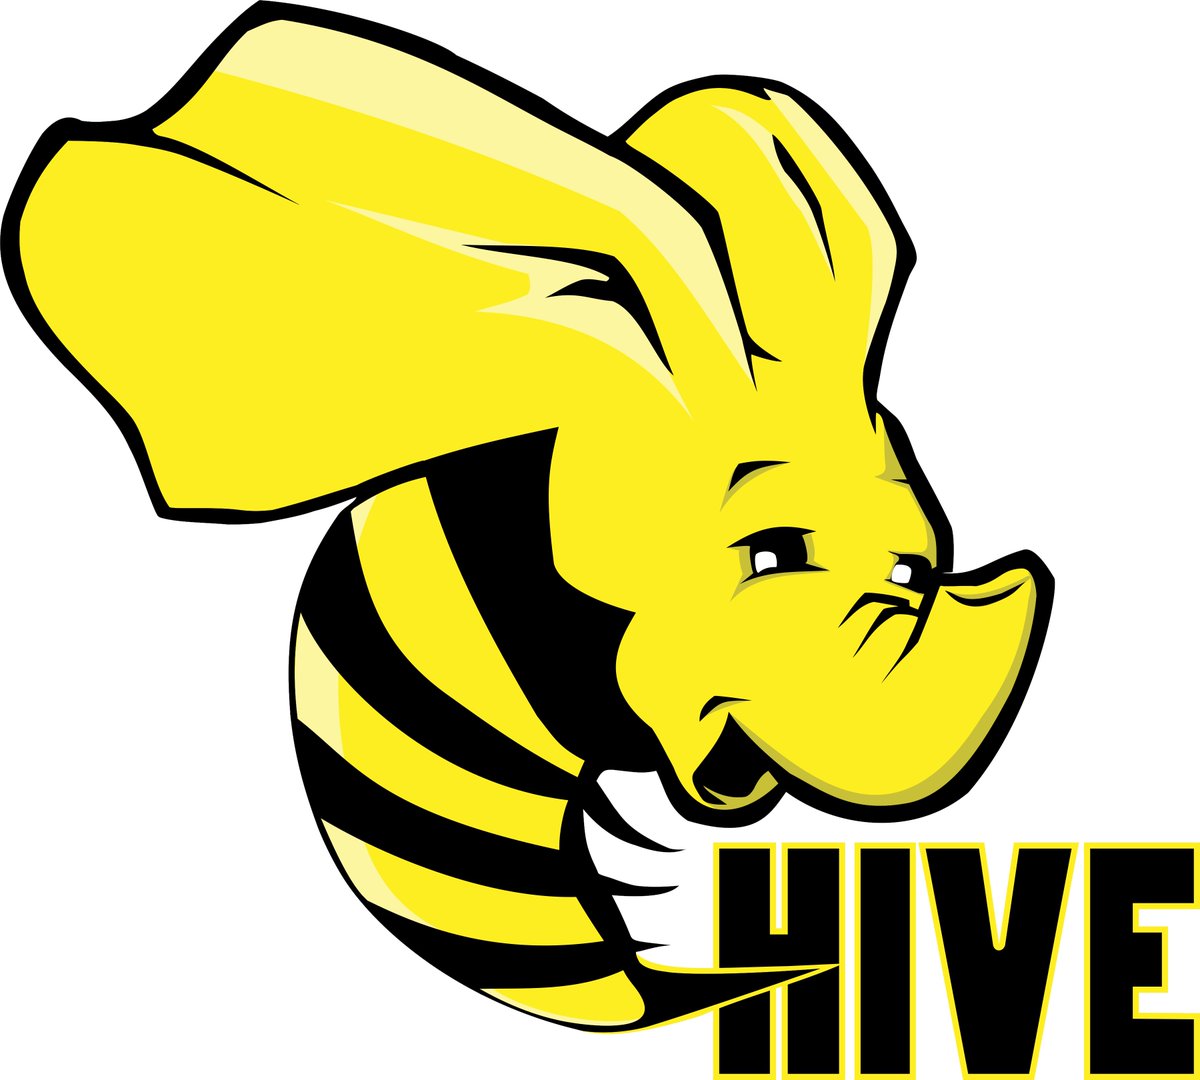 Apache Hive 4.0.0 GA has been released! @ApacheHive is a data warehouse software built on top of @hadoop that facilitates querying and managing large datasets residing in distributed storage. #opensource

Download: bit.ly/3vBPLLe
Release notes: bit.ly/3U3ahO7